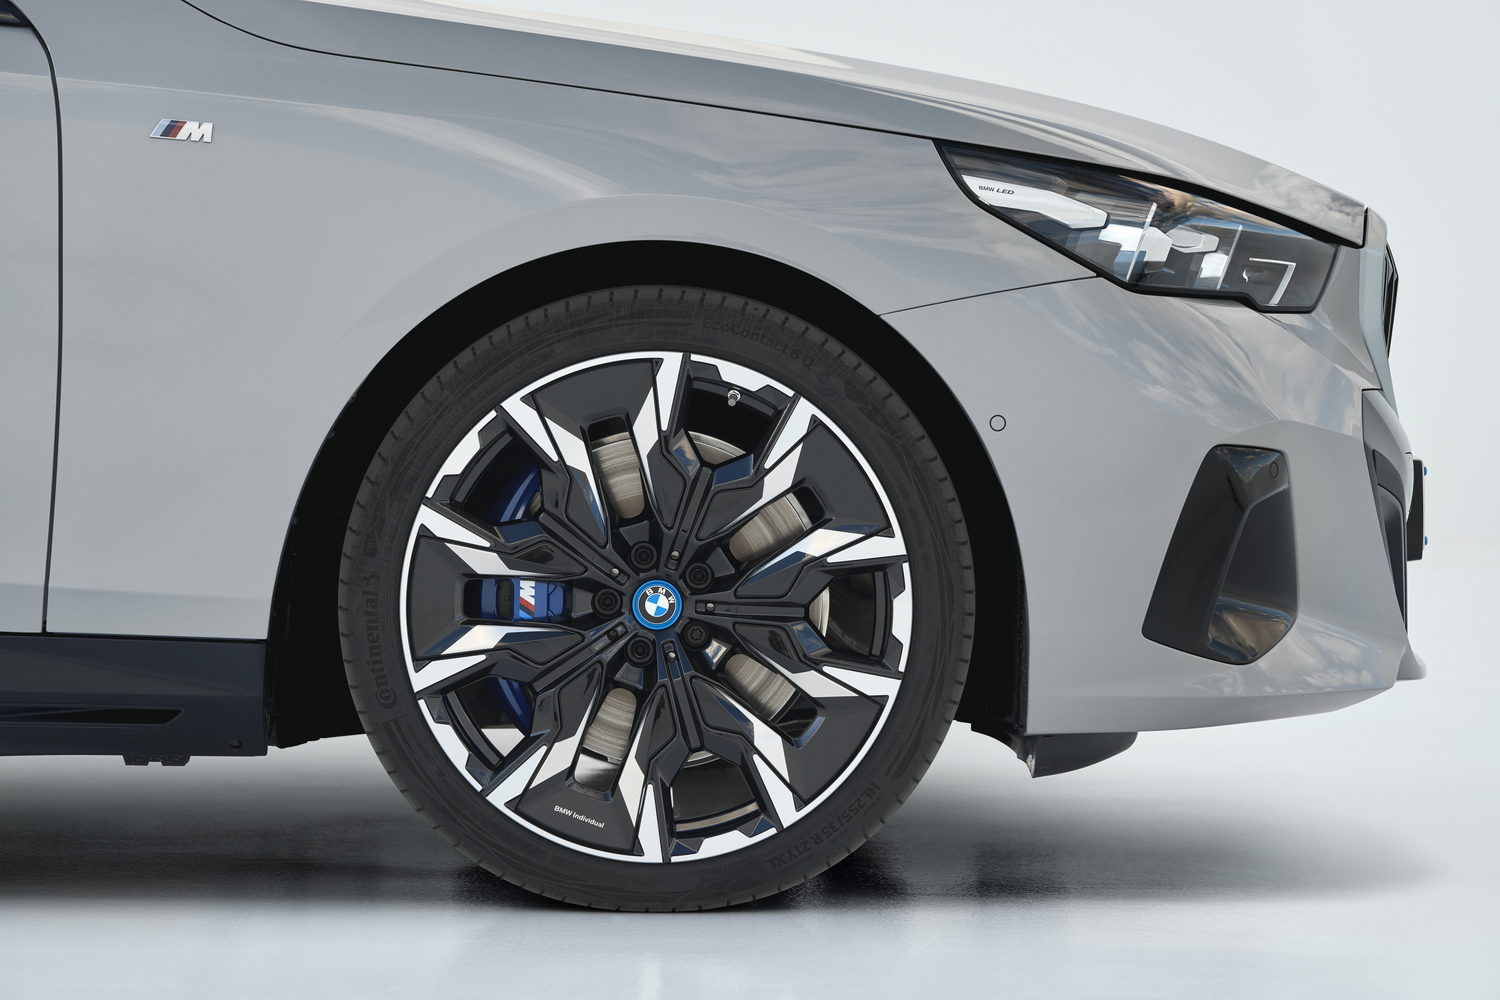 BMW i5 is new electric 5 Series